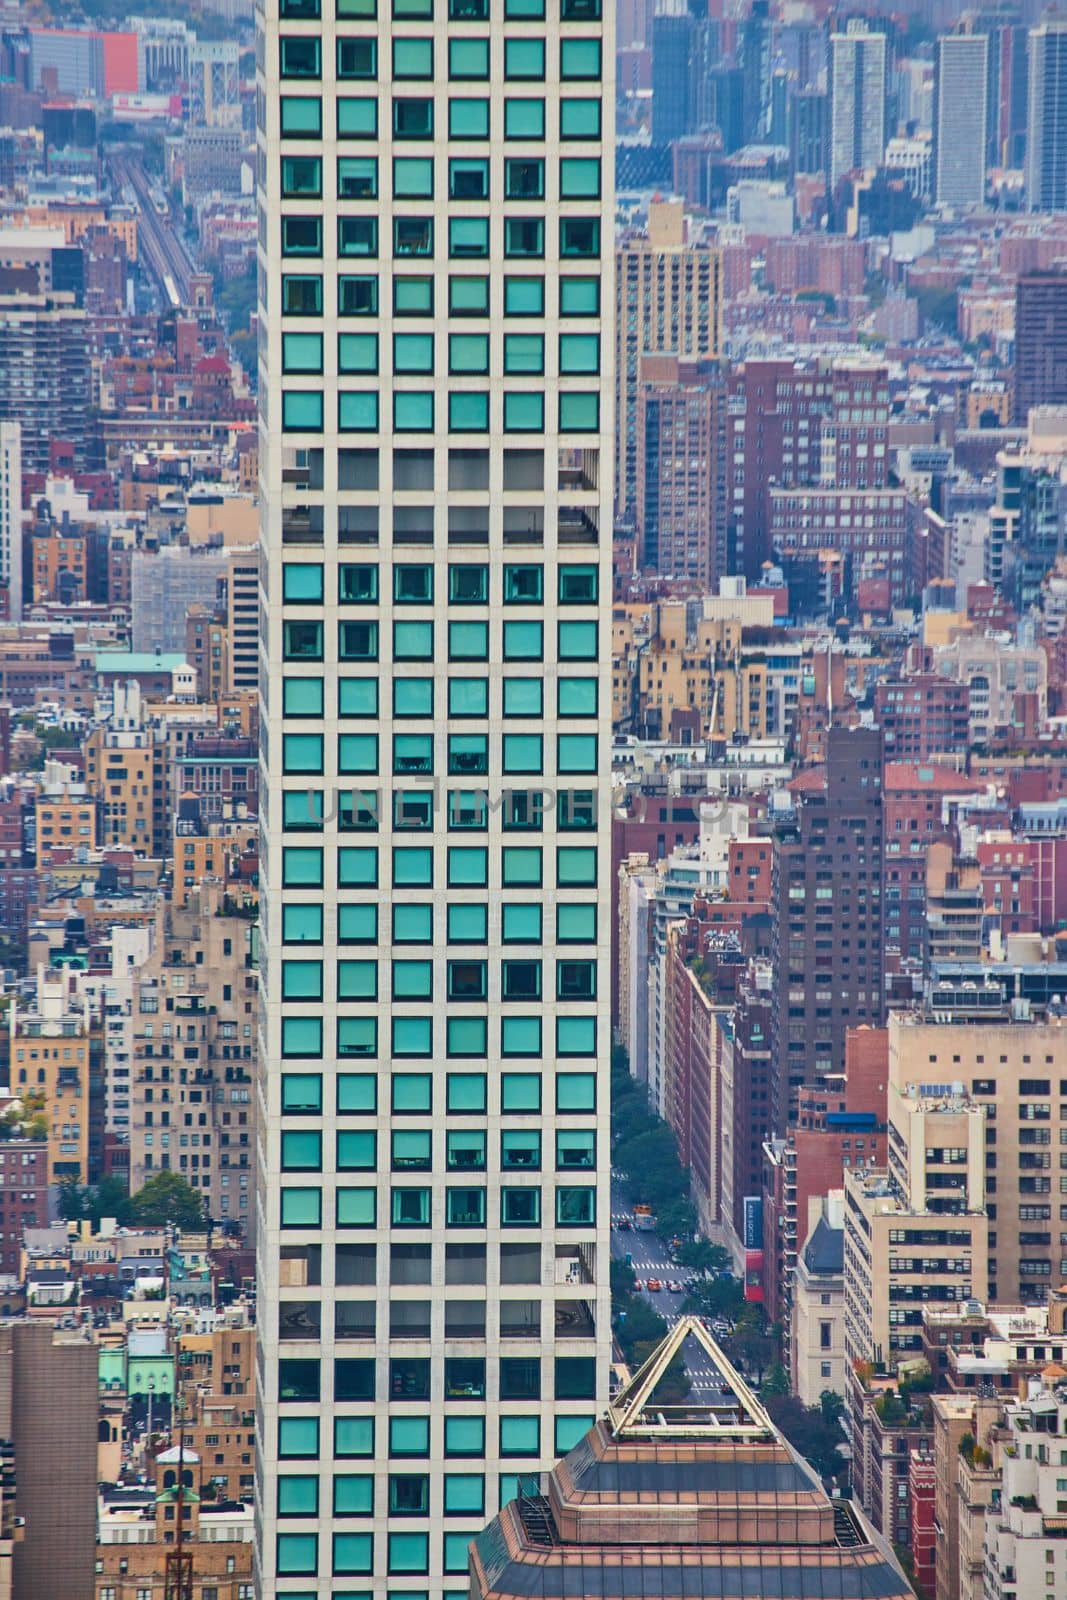 Image of Tall narrow skyscraper of turquoise squares with background of small buildings from above vertical